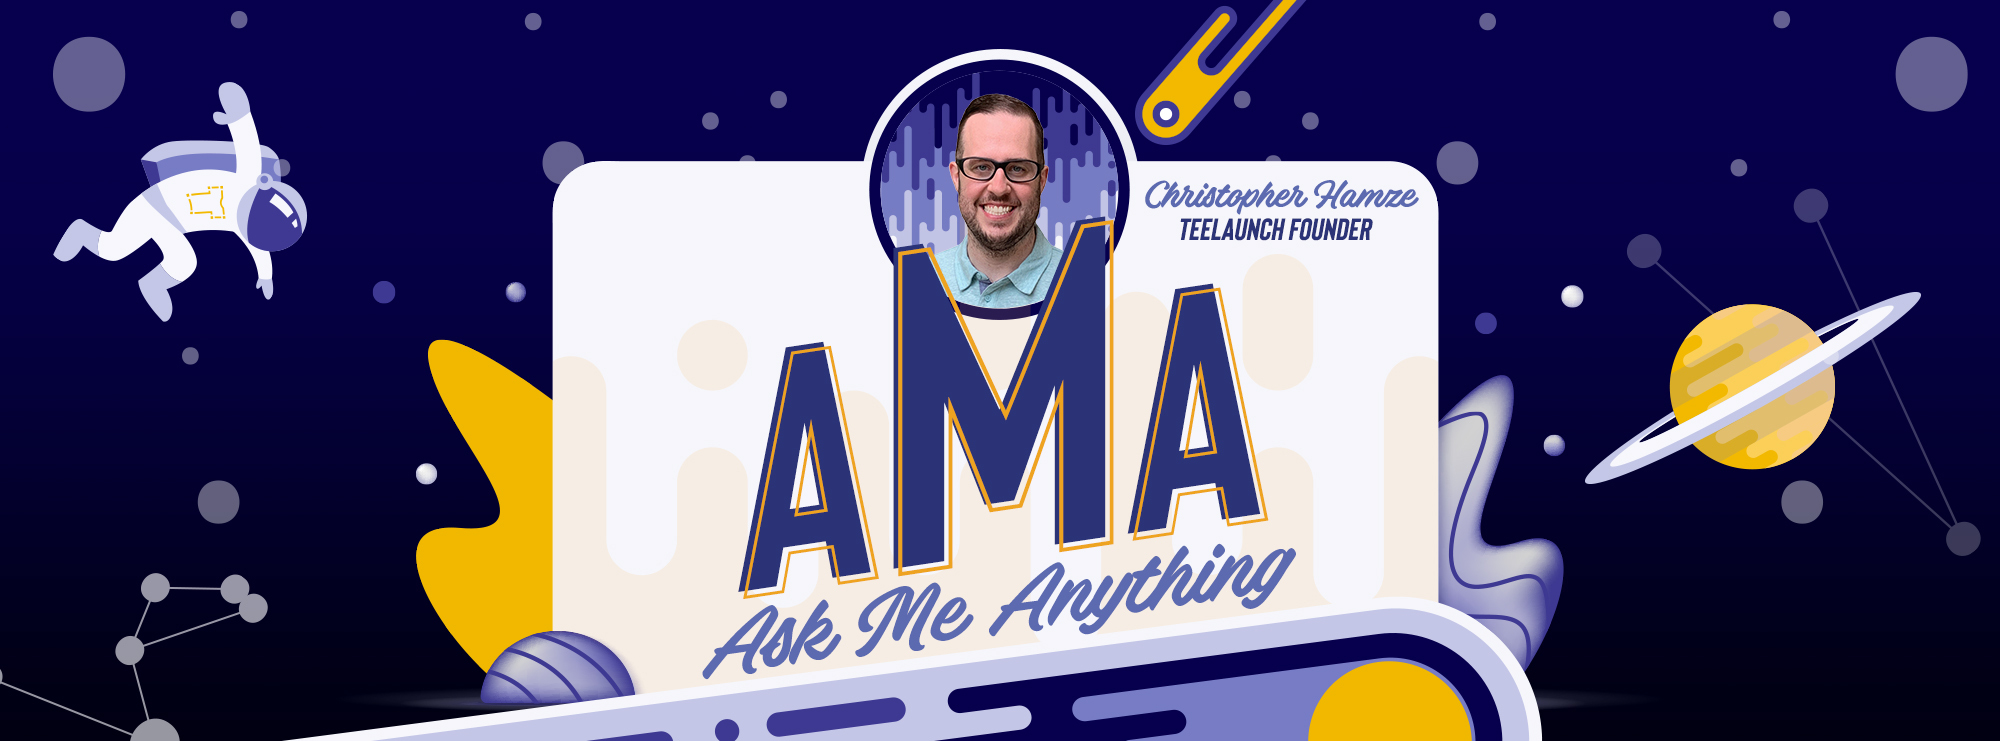 Join Our New Weekly AMA: Your Direct Line to teelaunch Insights!